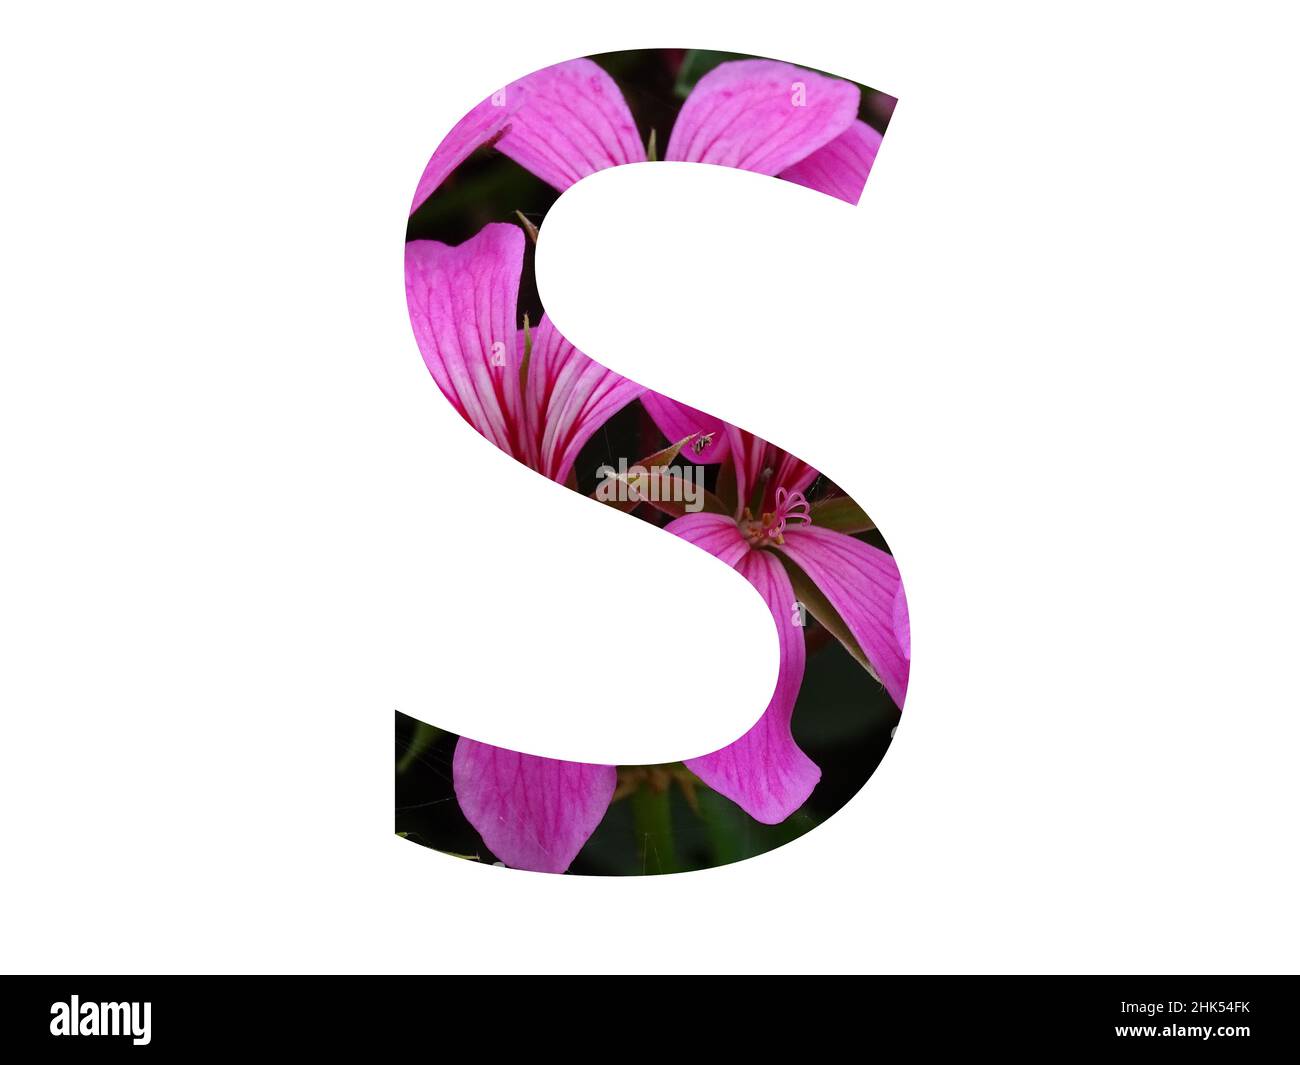 Letter S of the alphabet made with a pink flower of pelargonium, isolated on a white background Stock Photo